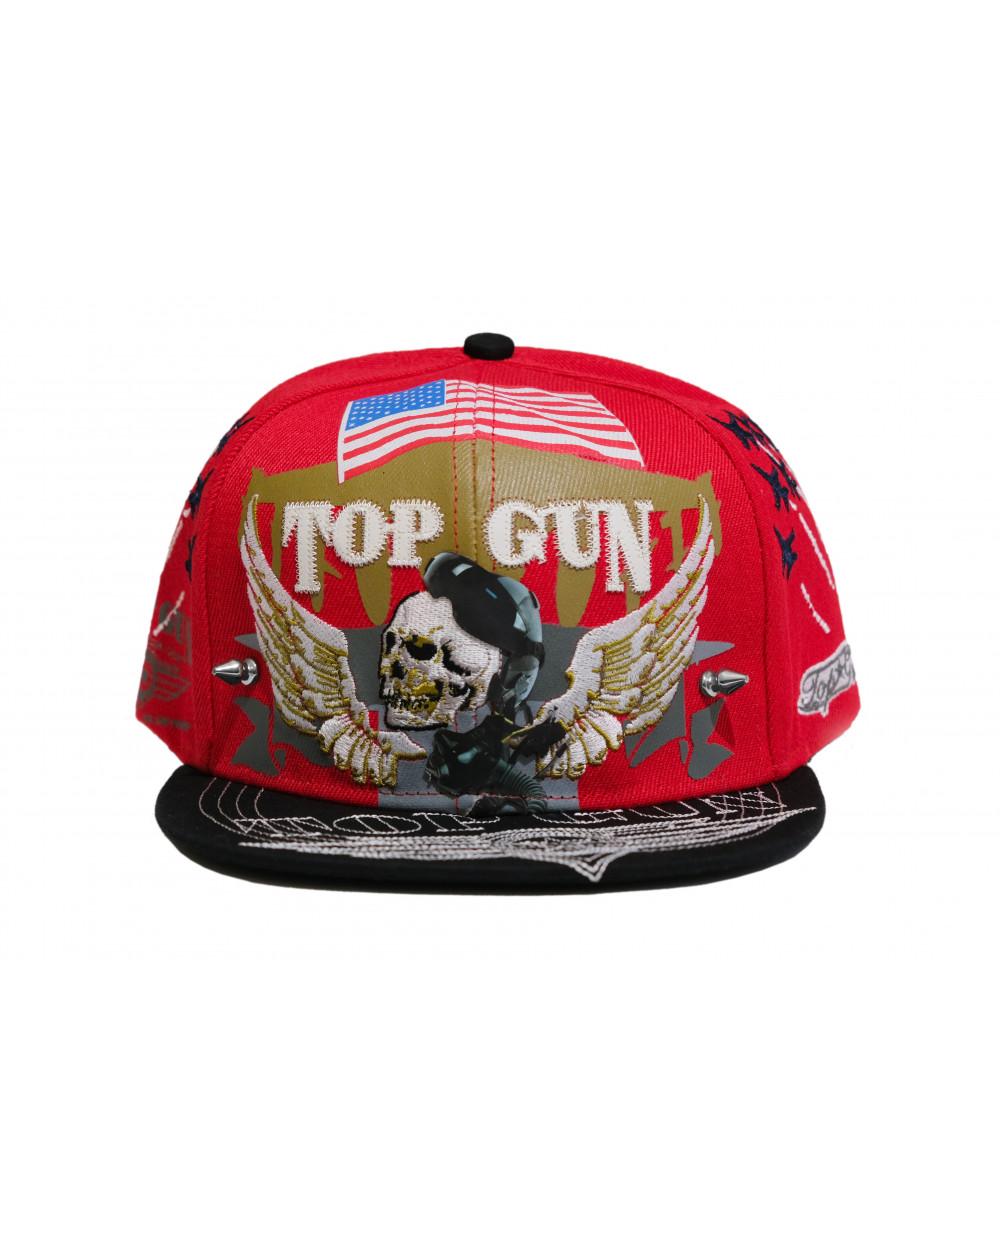 TOP GUN® EXCLUSIVE - Red Snap / Limited & Numbered Edition